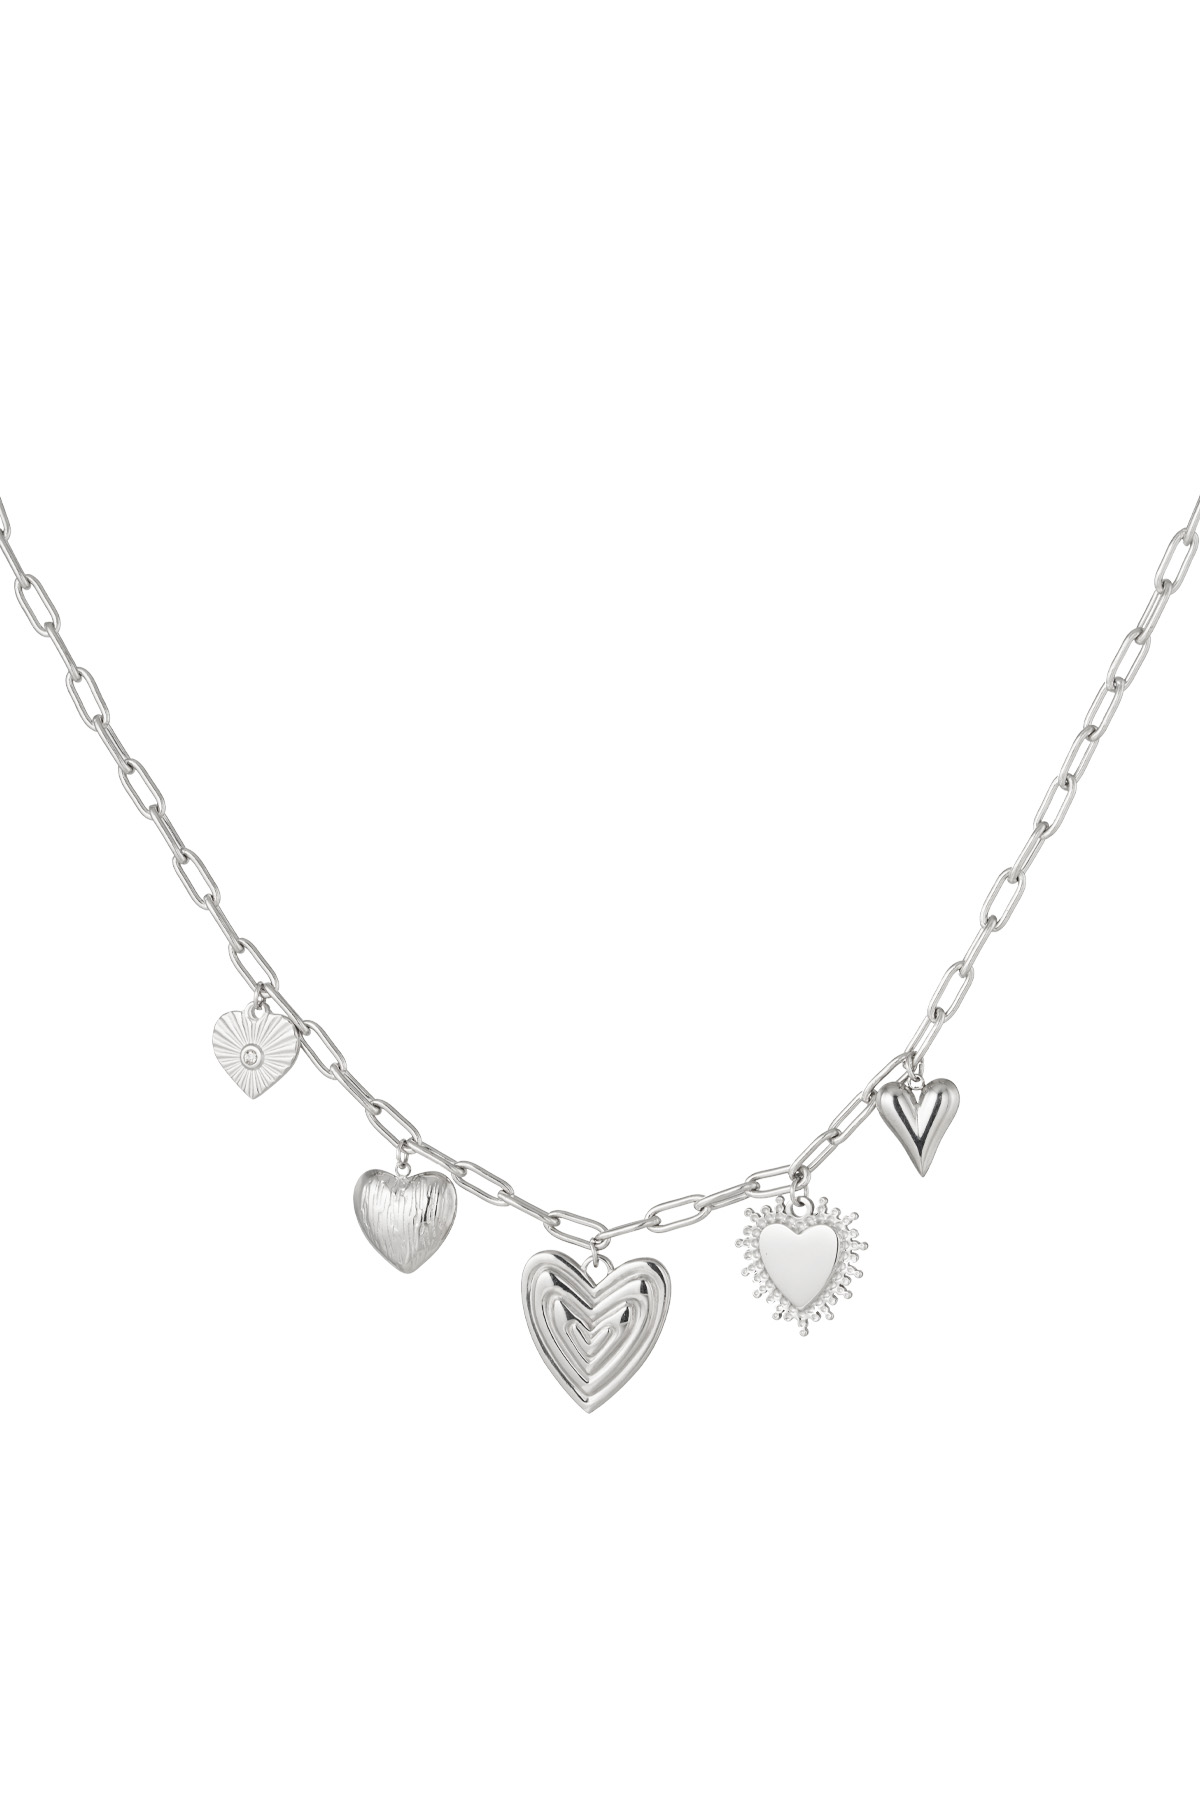 Charm necklace hearts for the win - silver